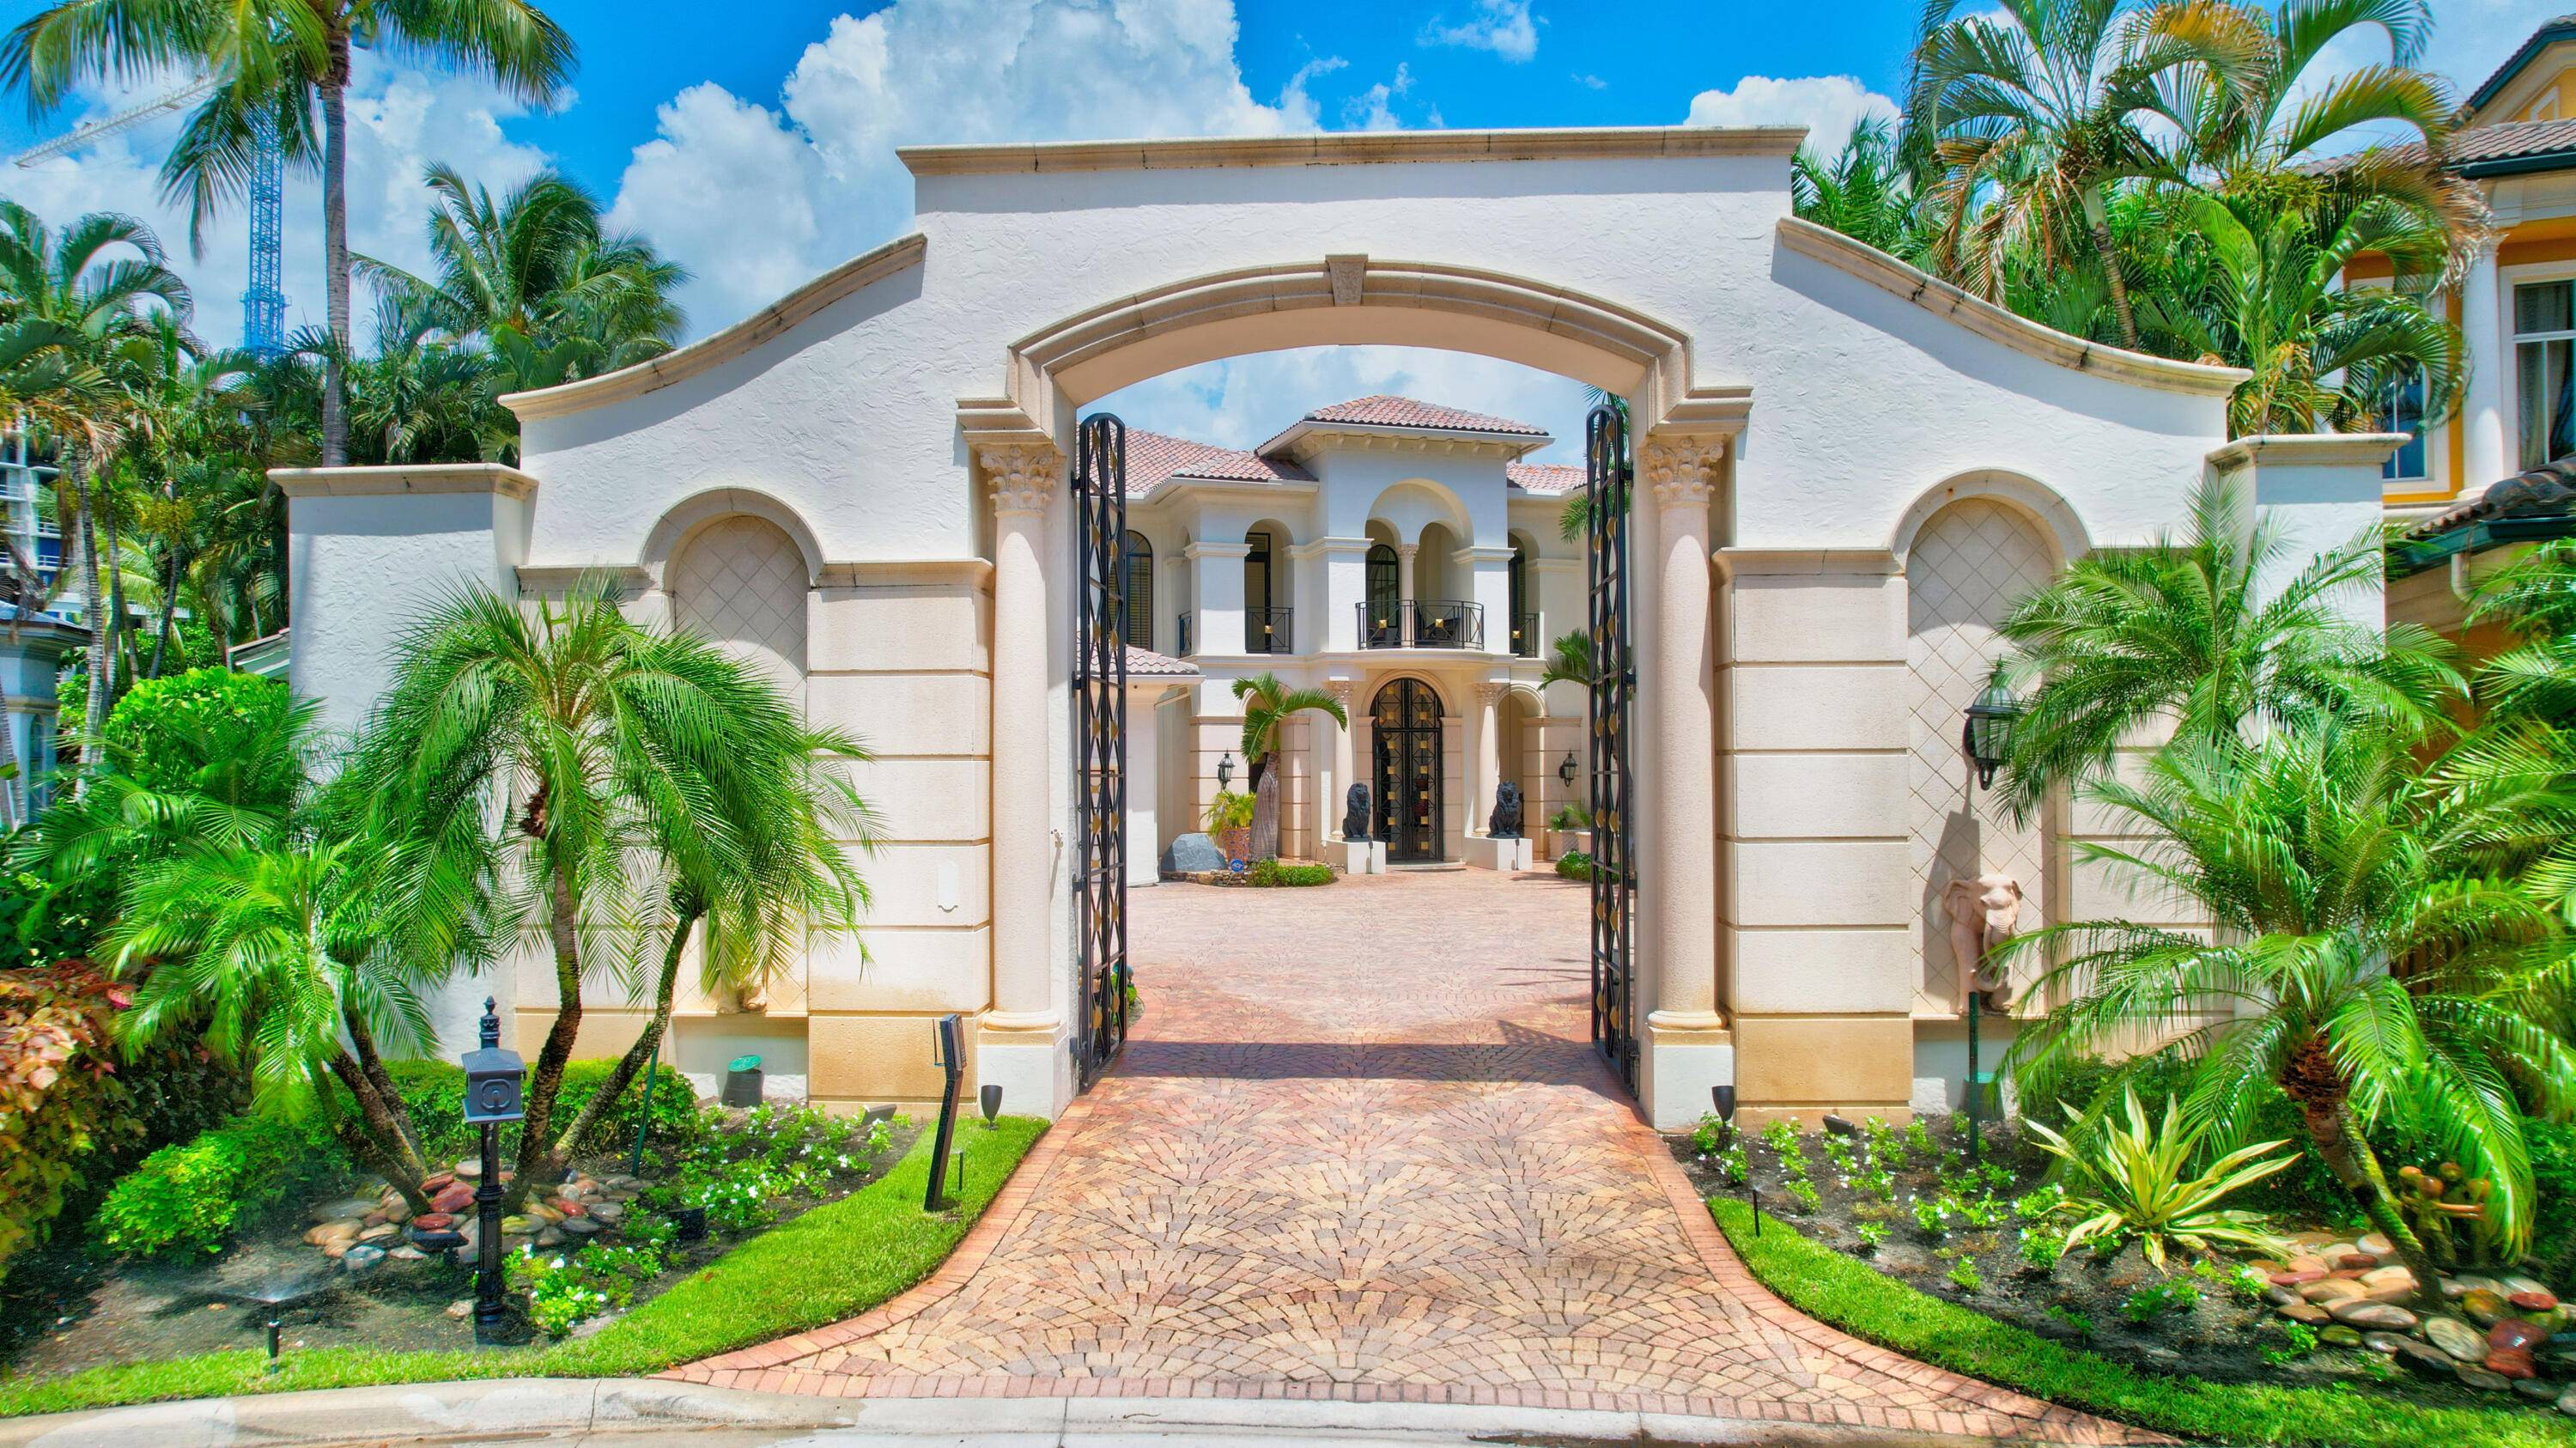 Spectacular Mizner Lake Estates Gated Mansion on the grounds of the famous Boca Hotel Resort and Beach Club with the most incredible Lakefront and Golf Course views.